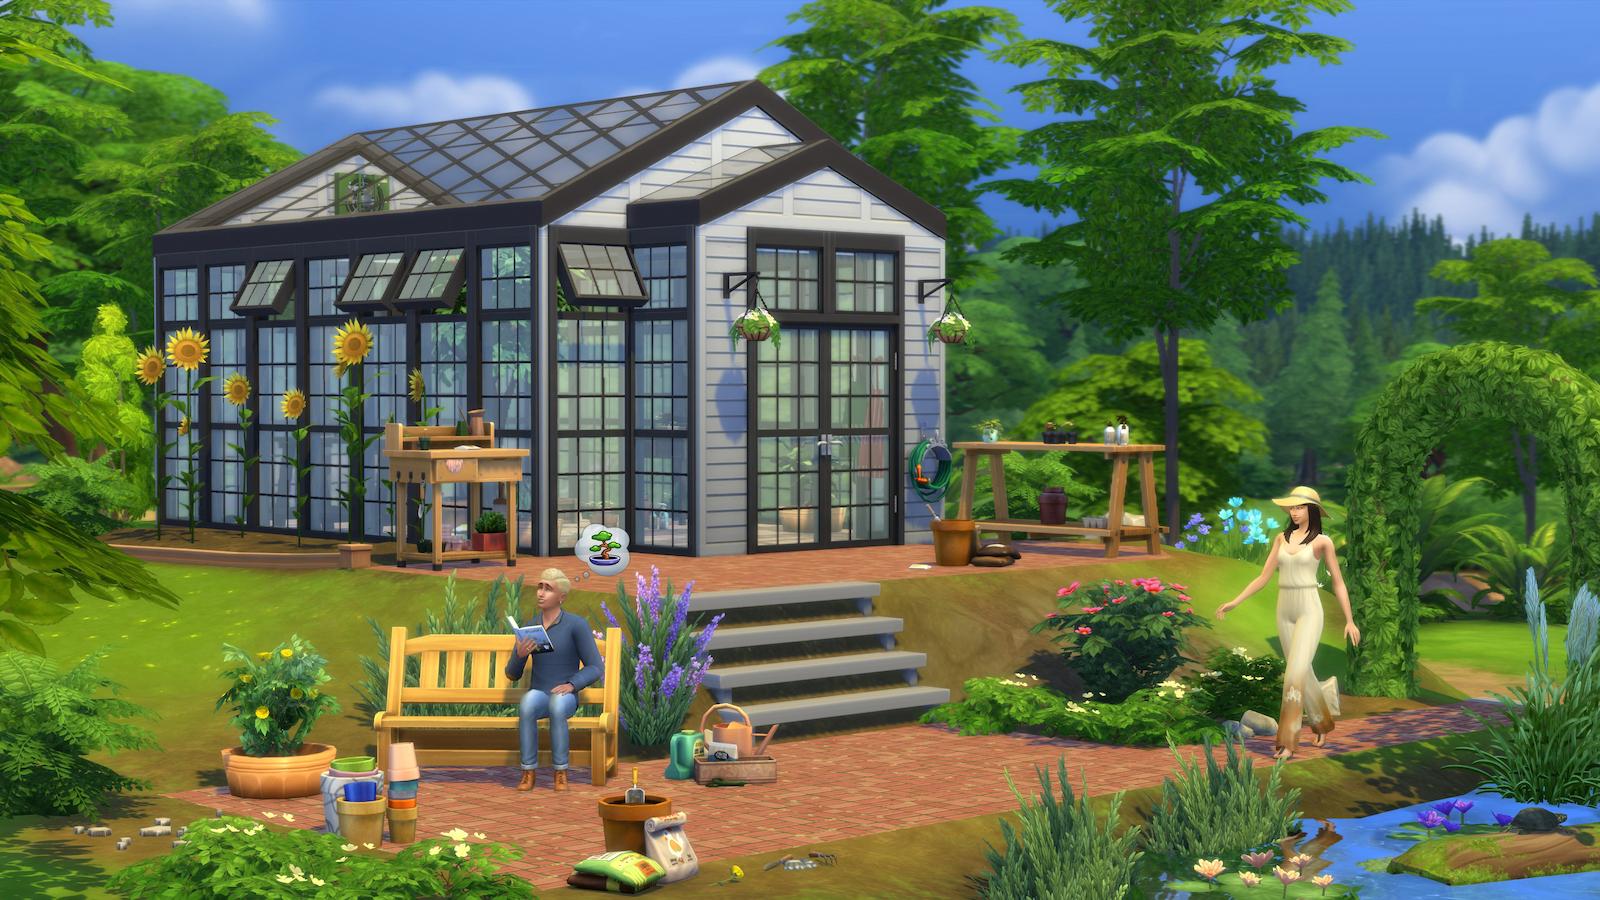 Greenhouse in The Sims 4